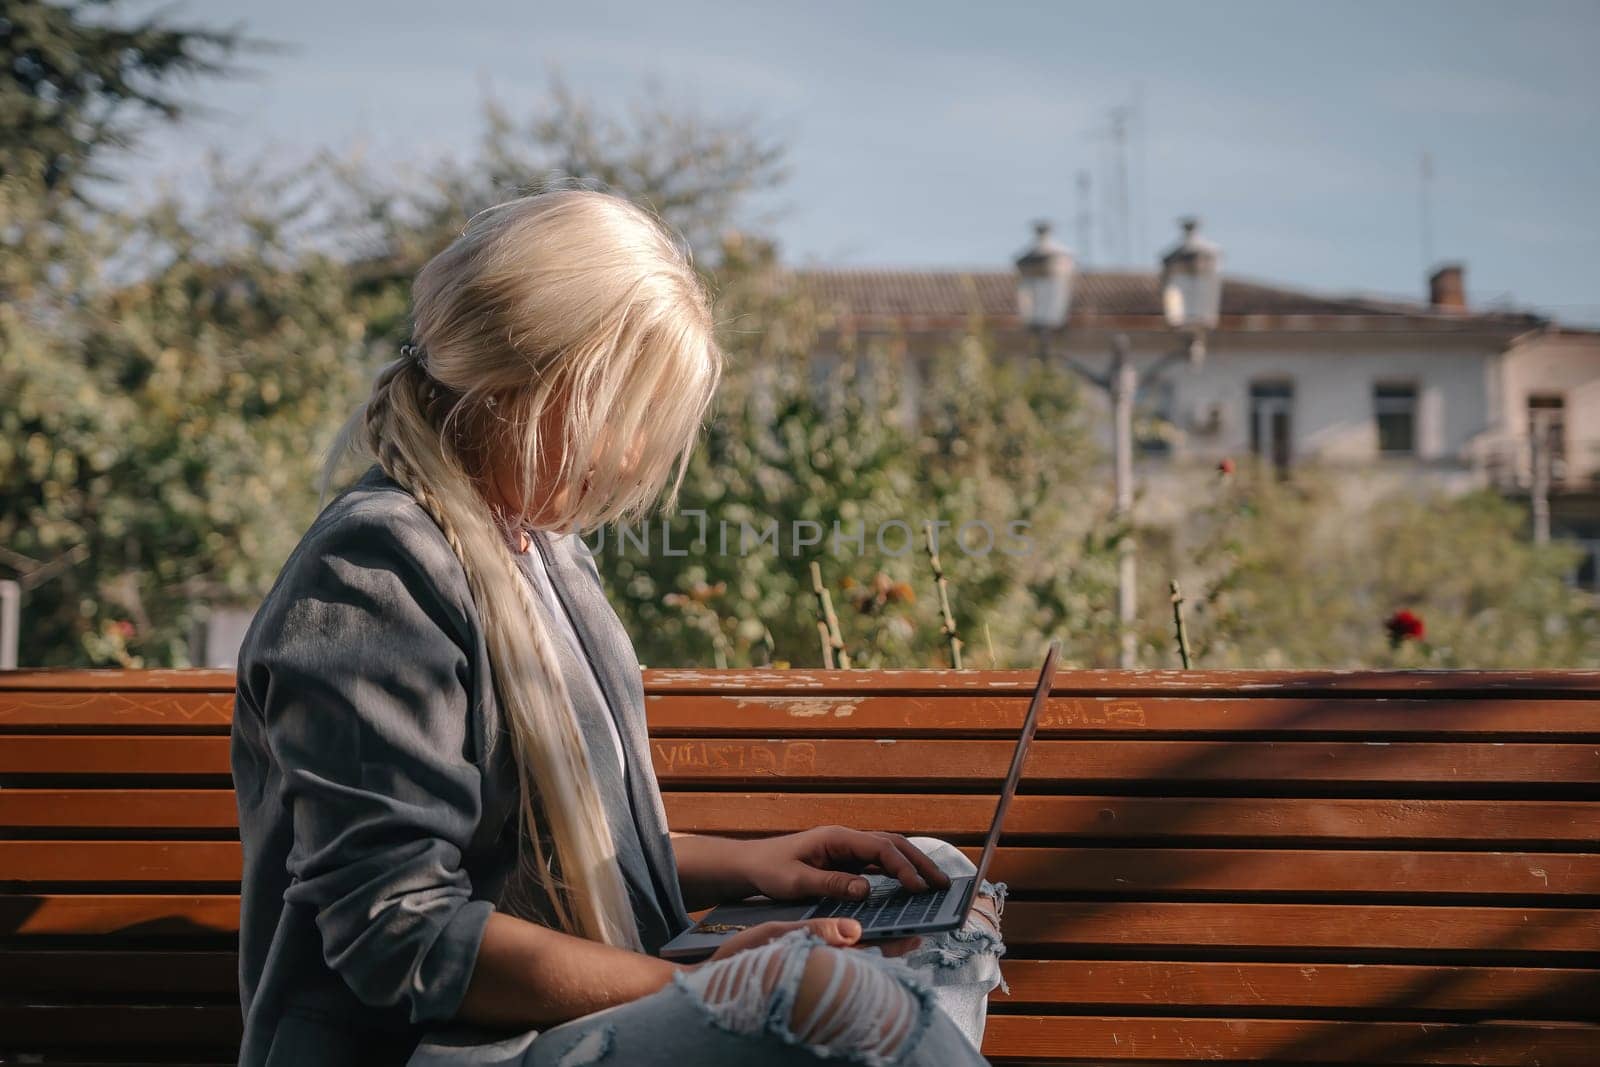 A blonde woman sits on a bench with a laptop open in front of her. She is wearing a gray jacket and has her hair in a ponytail. The scene suggests a casual and relaxed atmosphere